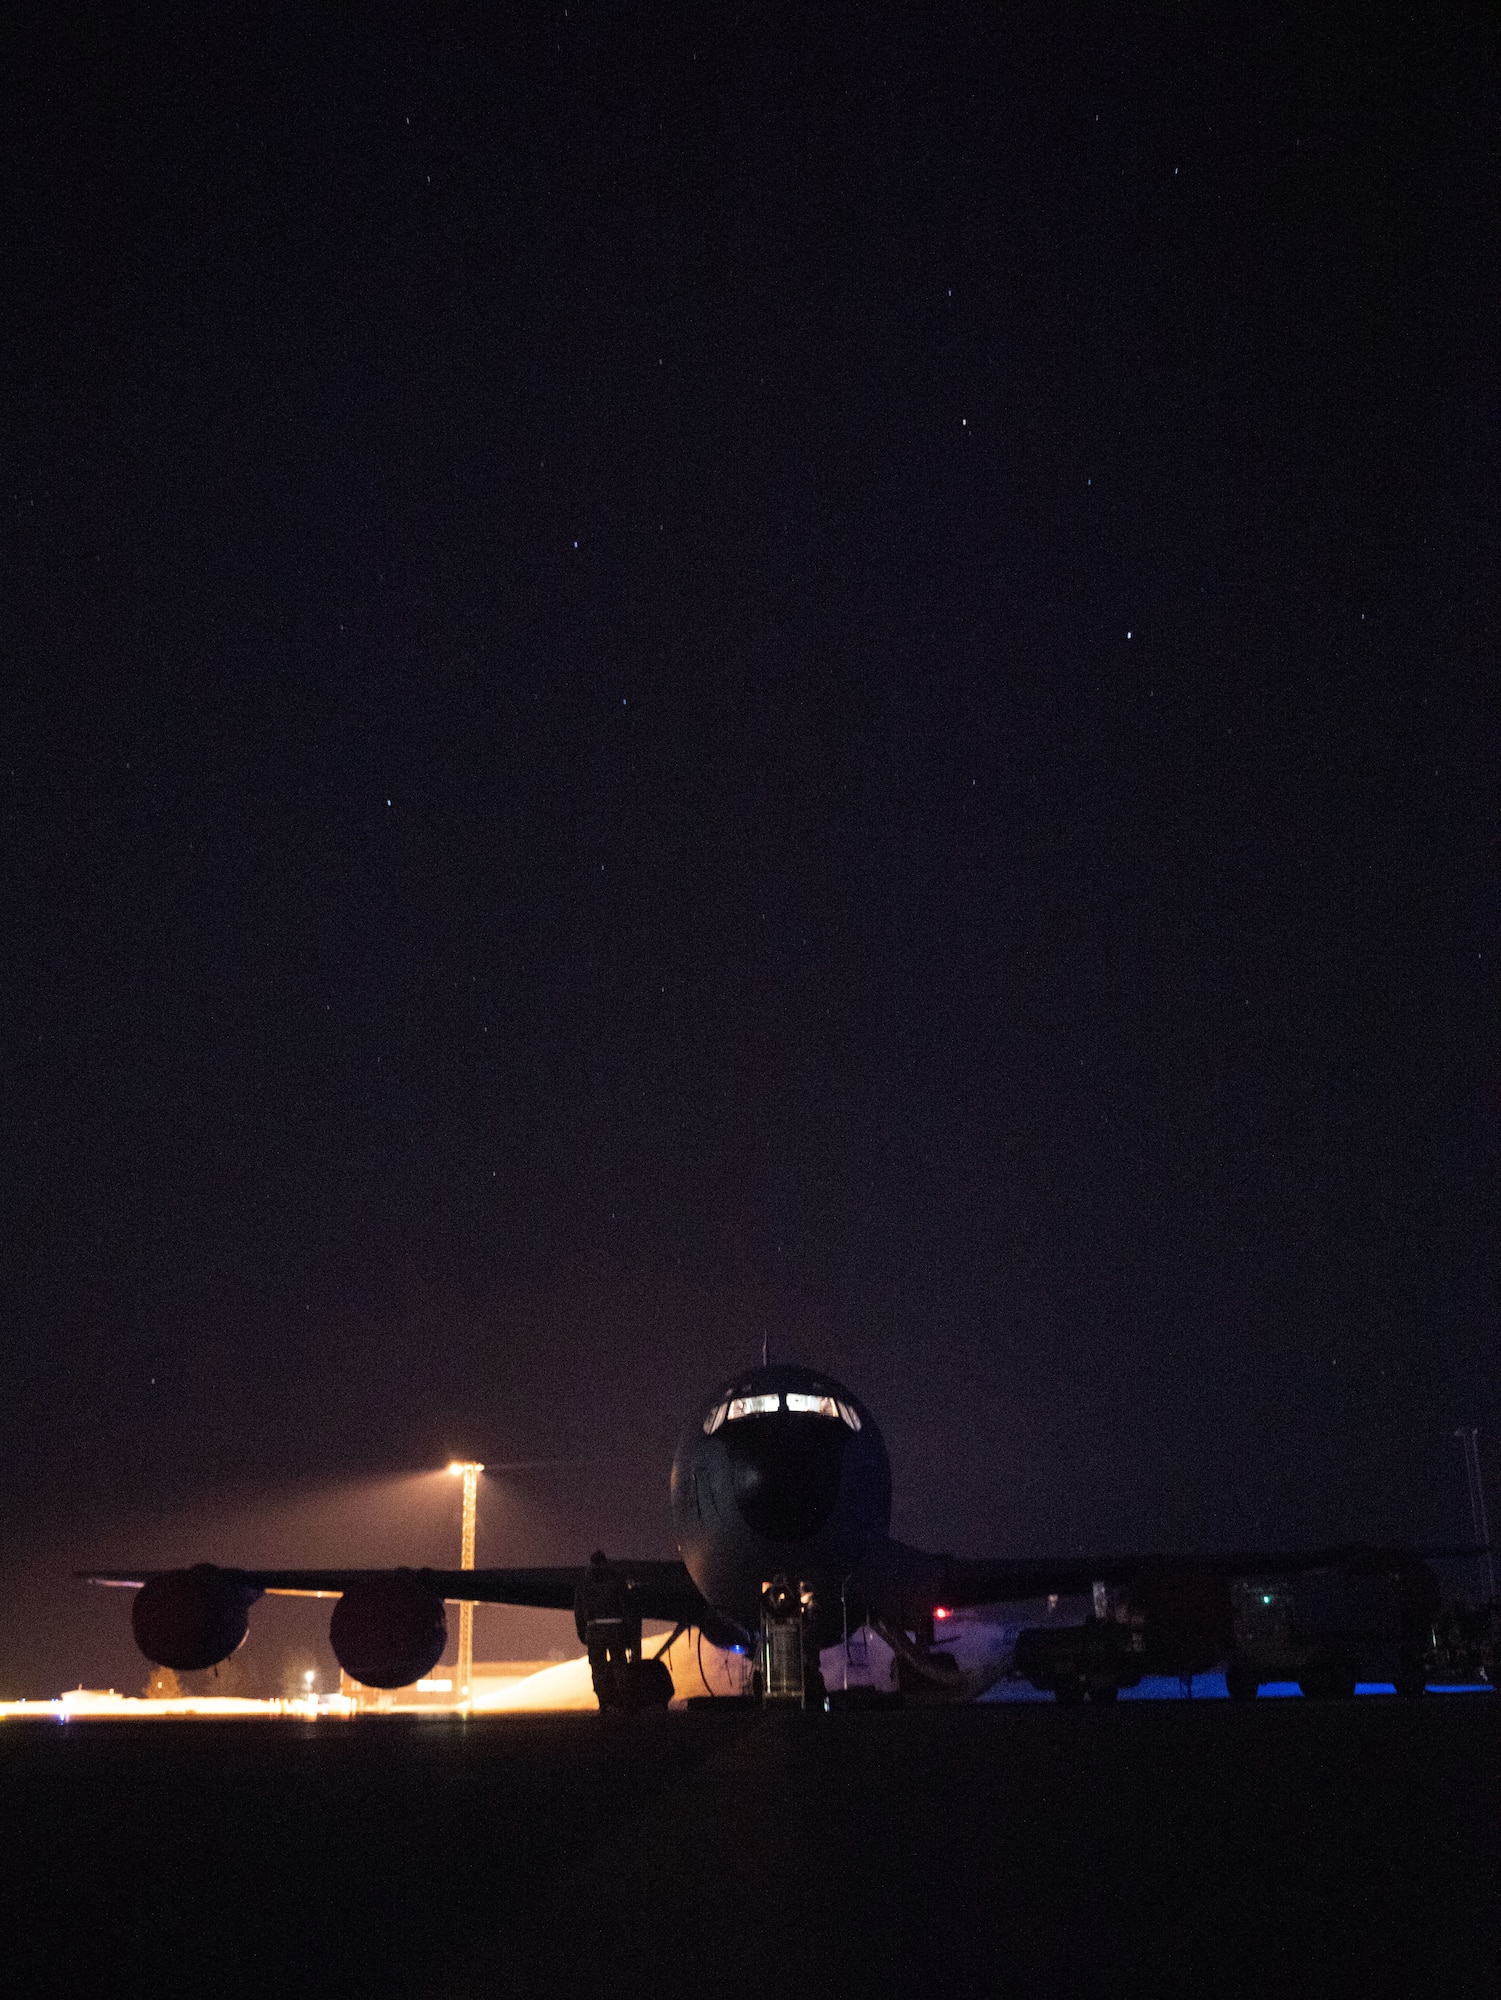 A KC-135 photographed at night.